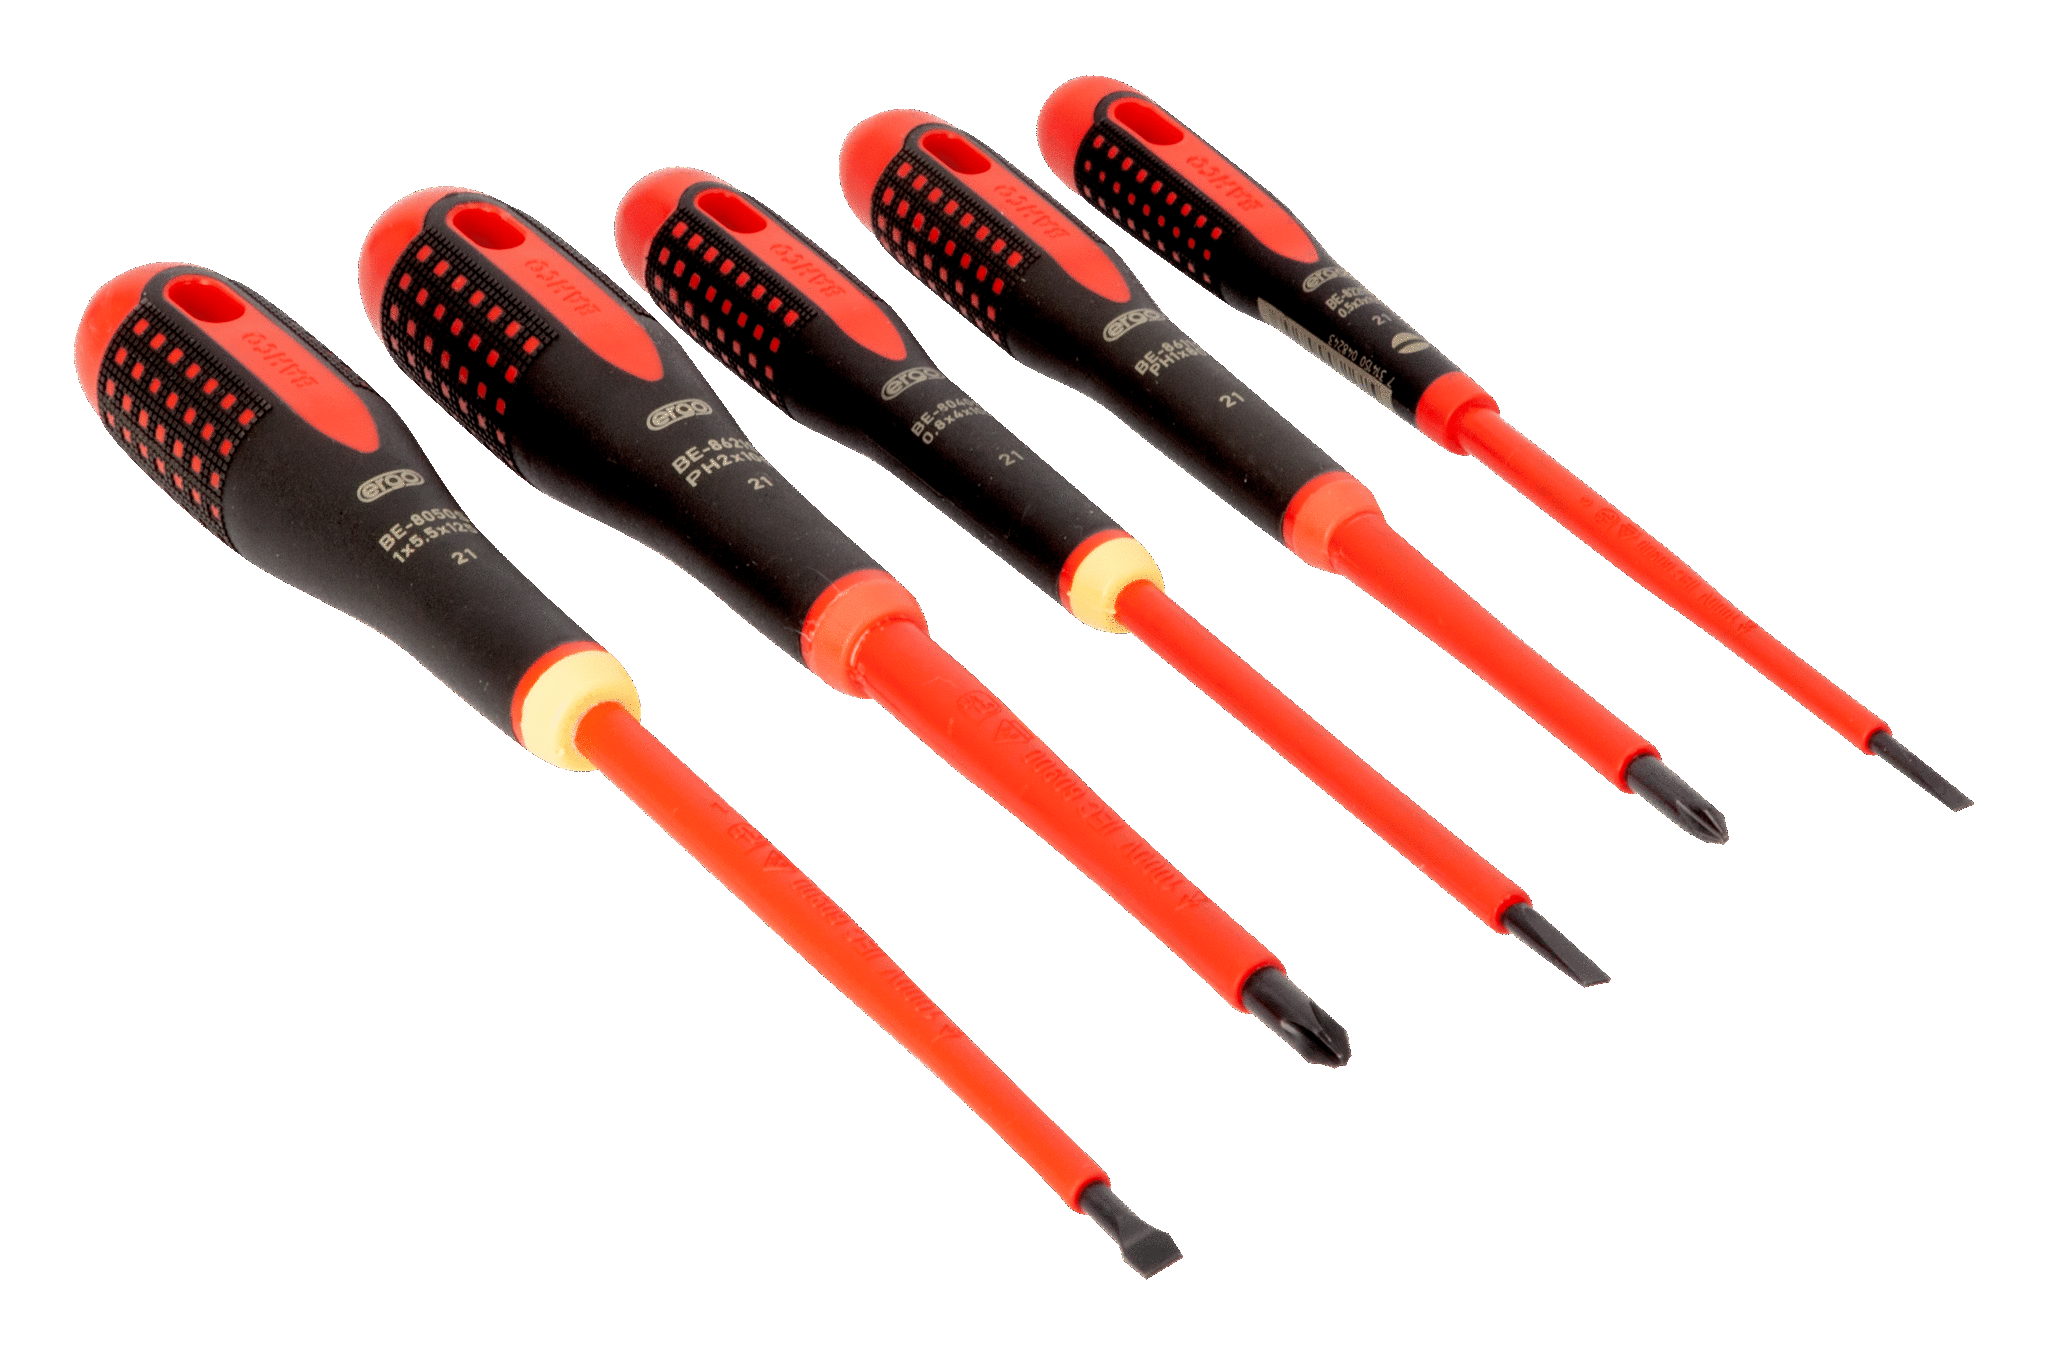 ERGO™ VDE Insulated Slotted and Phillips Screwdriver Set with 3-Component Handle 5 Pcs - 9881S by Bahco